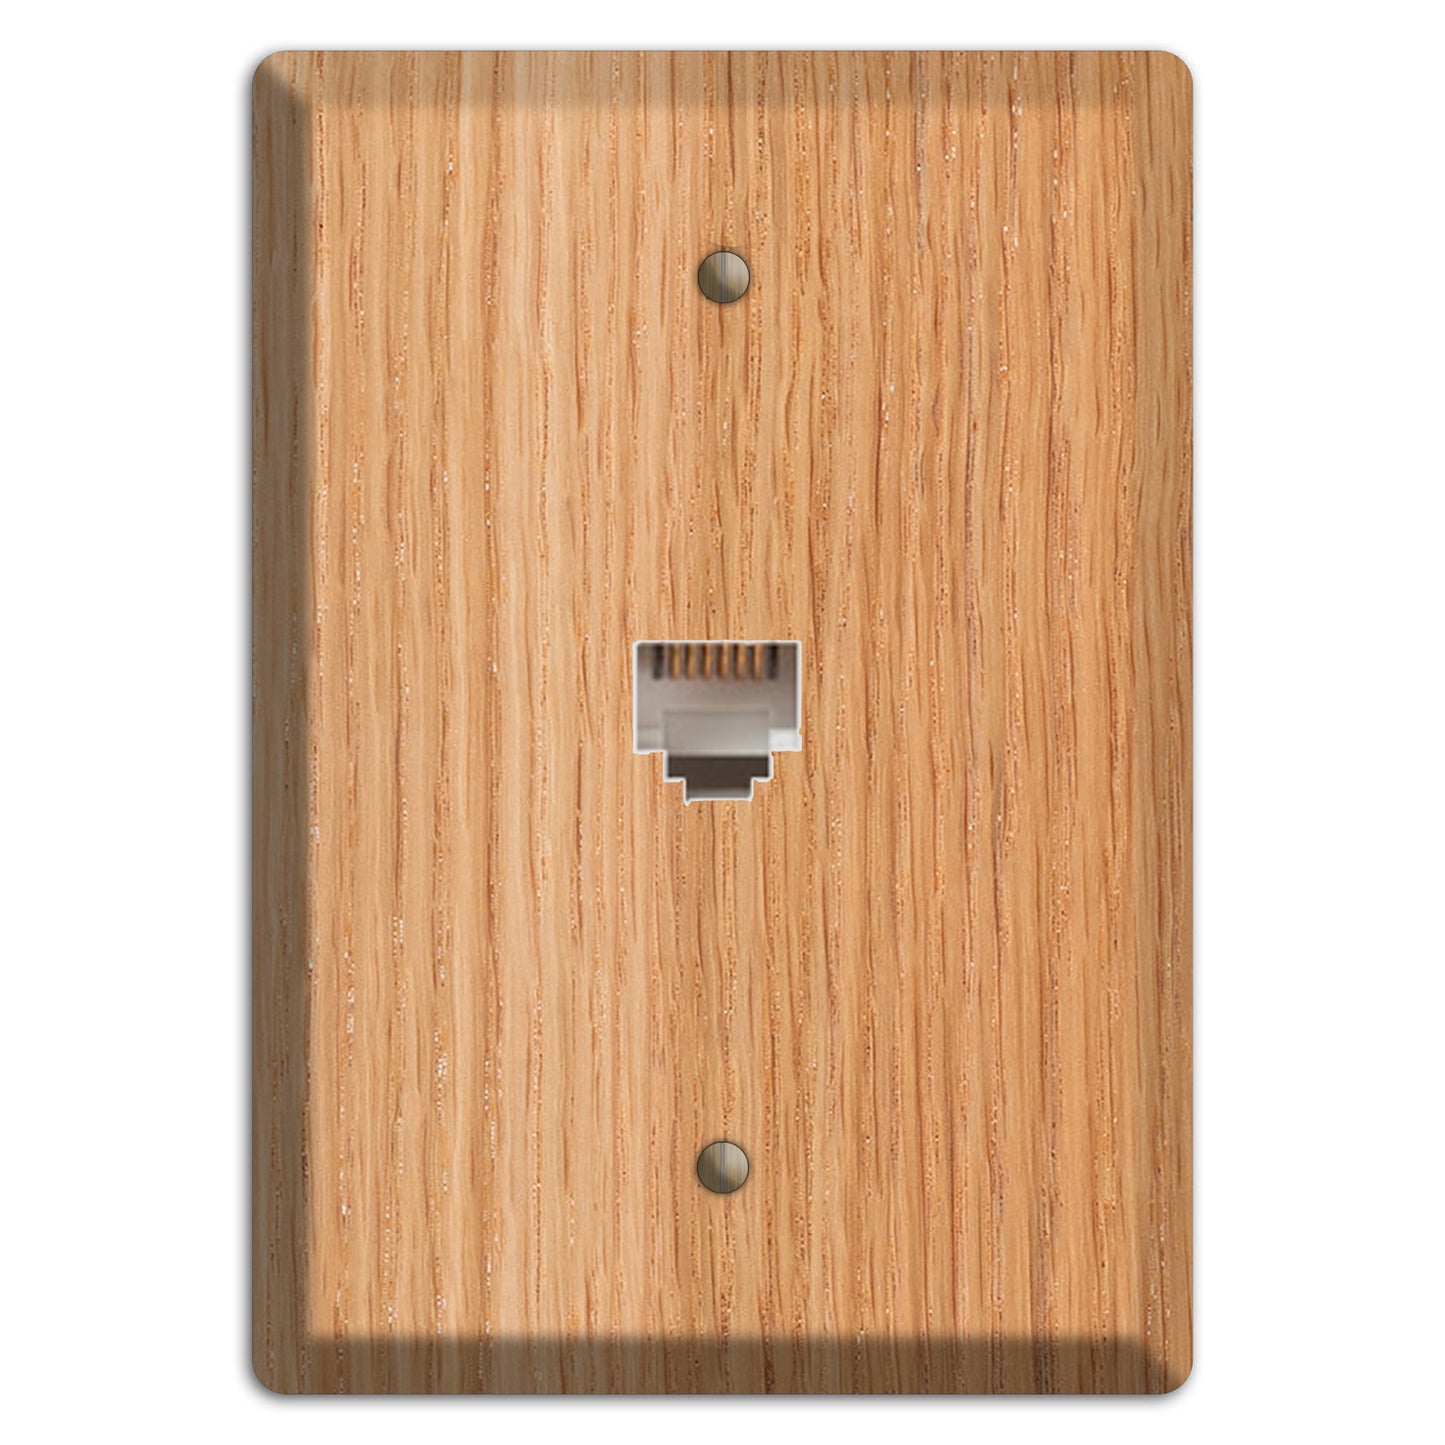 Red Oak Wood Duplex Outlet / Receptacle Cover Plate